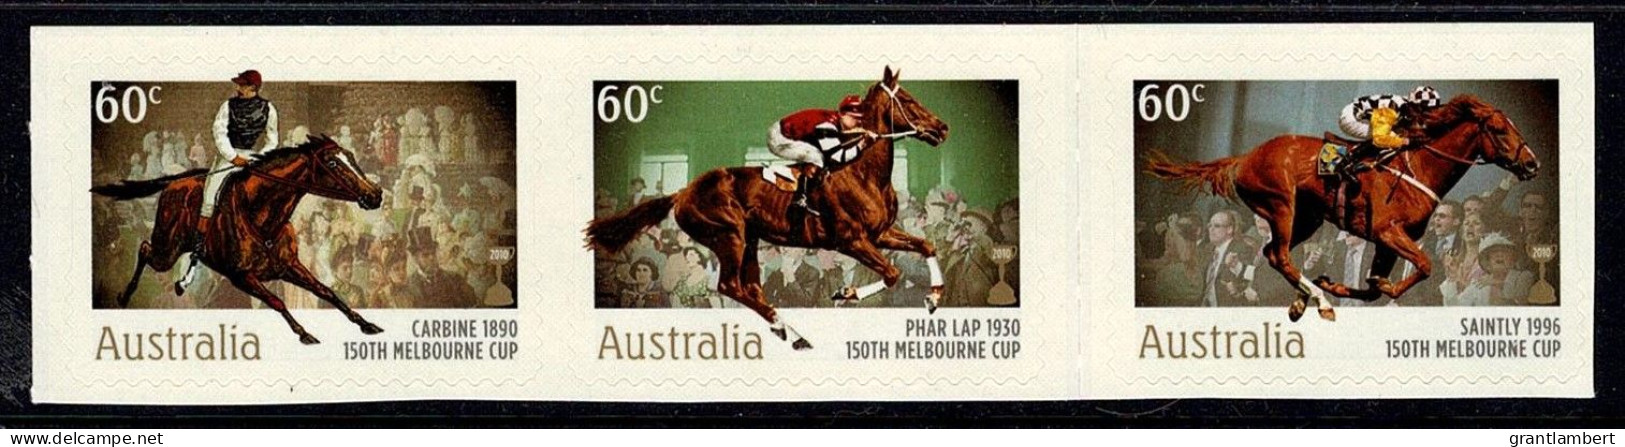 Australia 2010 Melbourne Cup Horses - Strip Of 3 Self-adhesives MNH - Mint Stamps